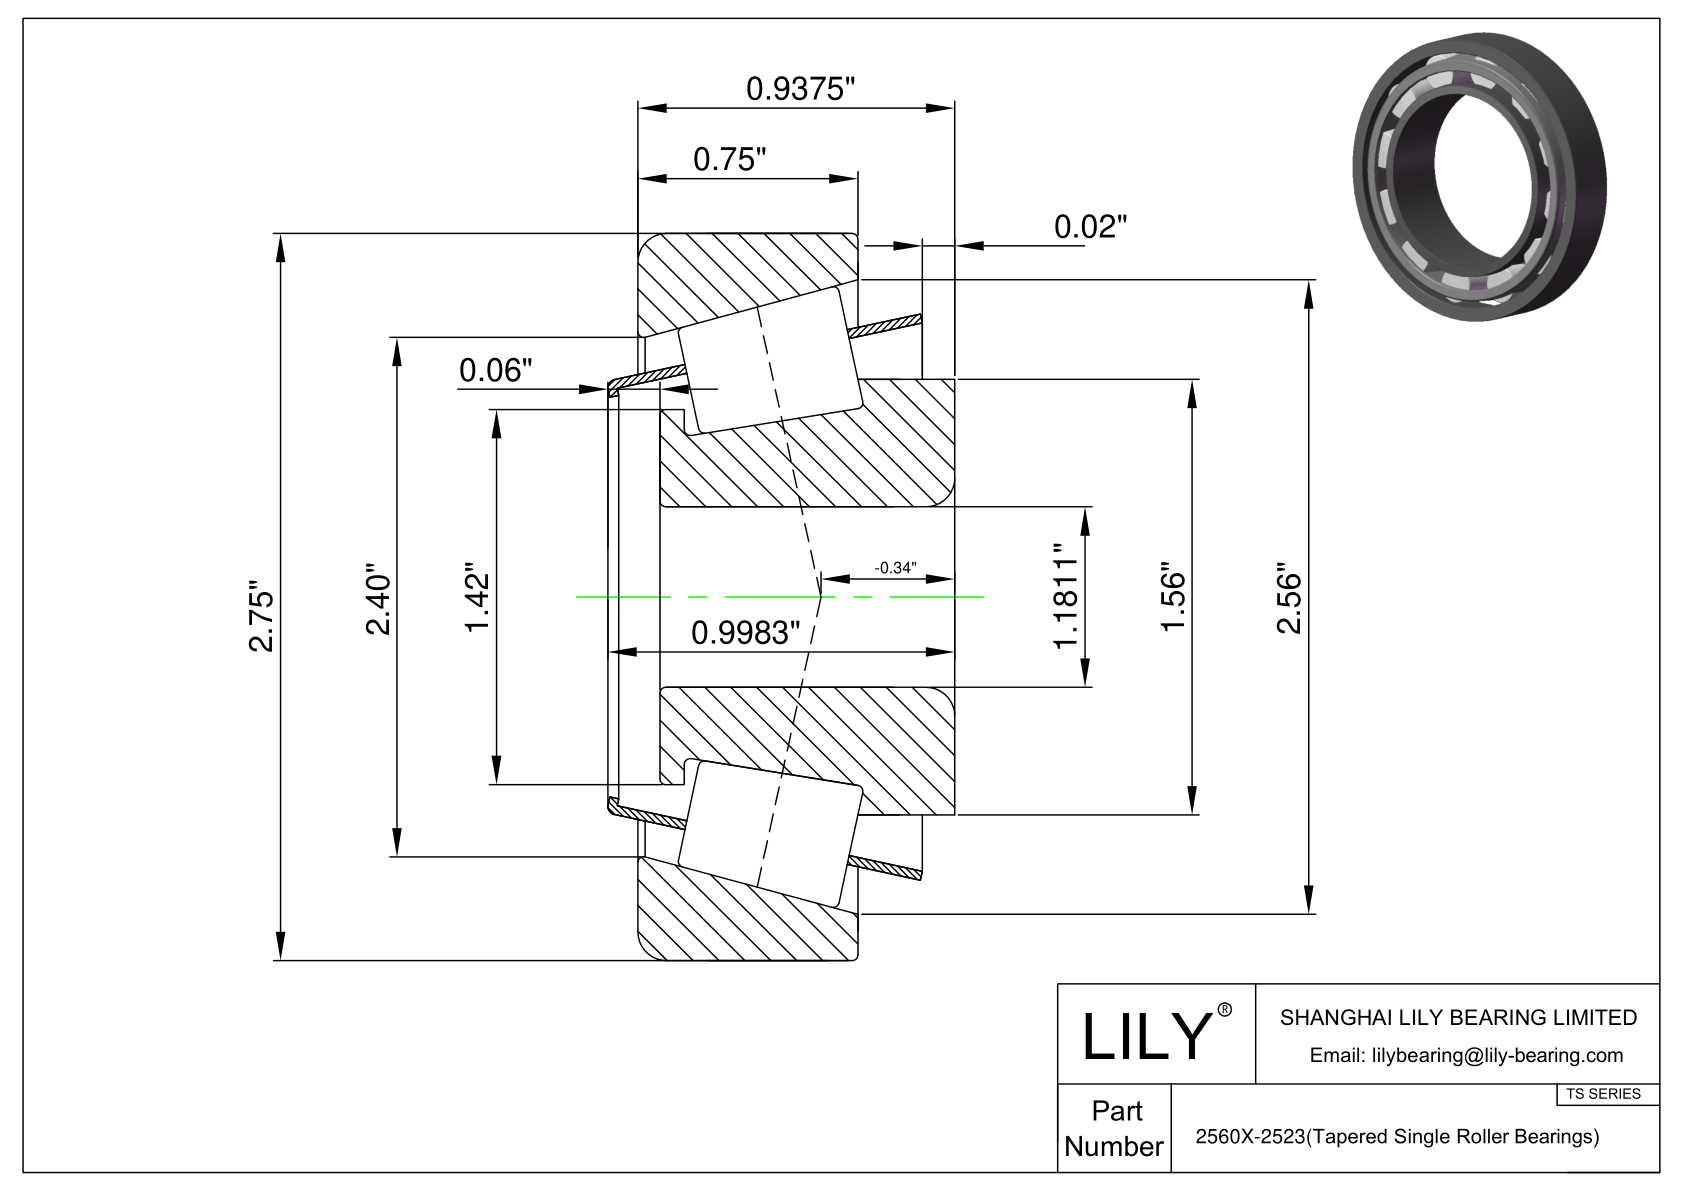 2560X-2523 TS (Tapered Single Roller Bearings) (Imperial) cad drawing